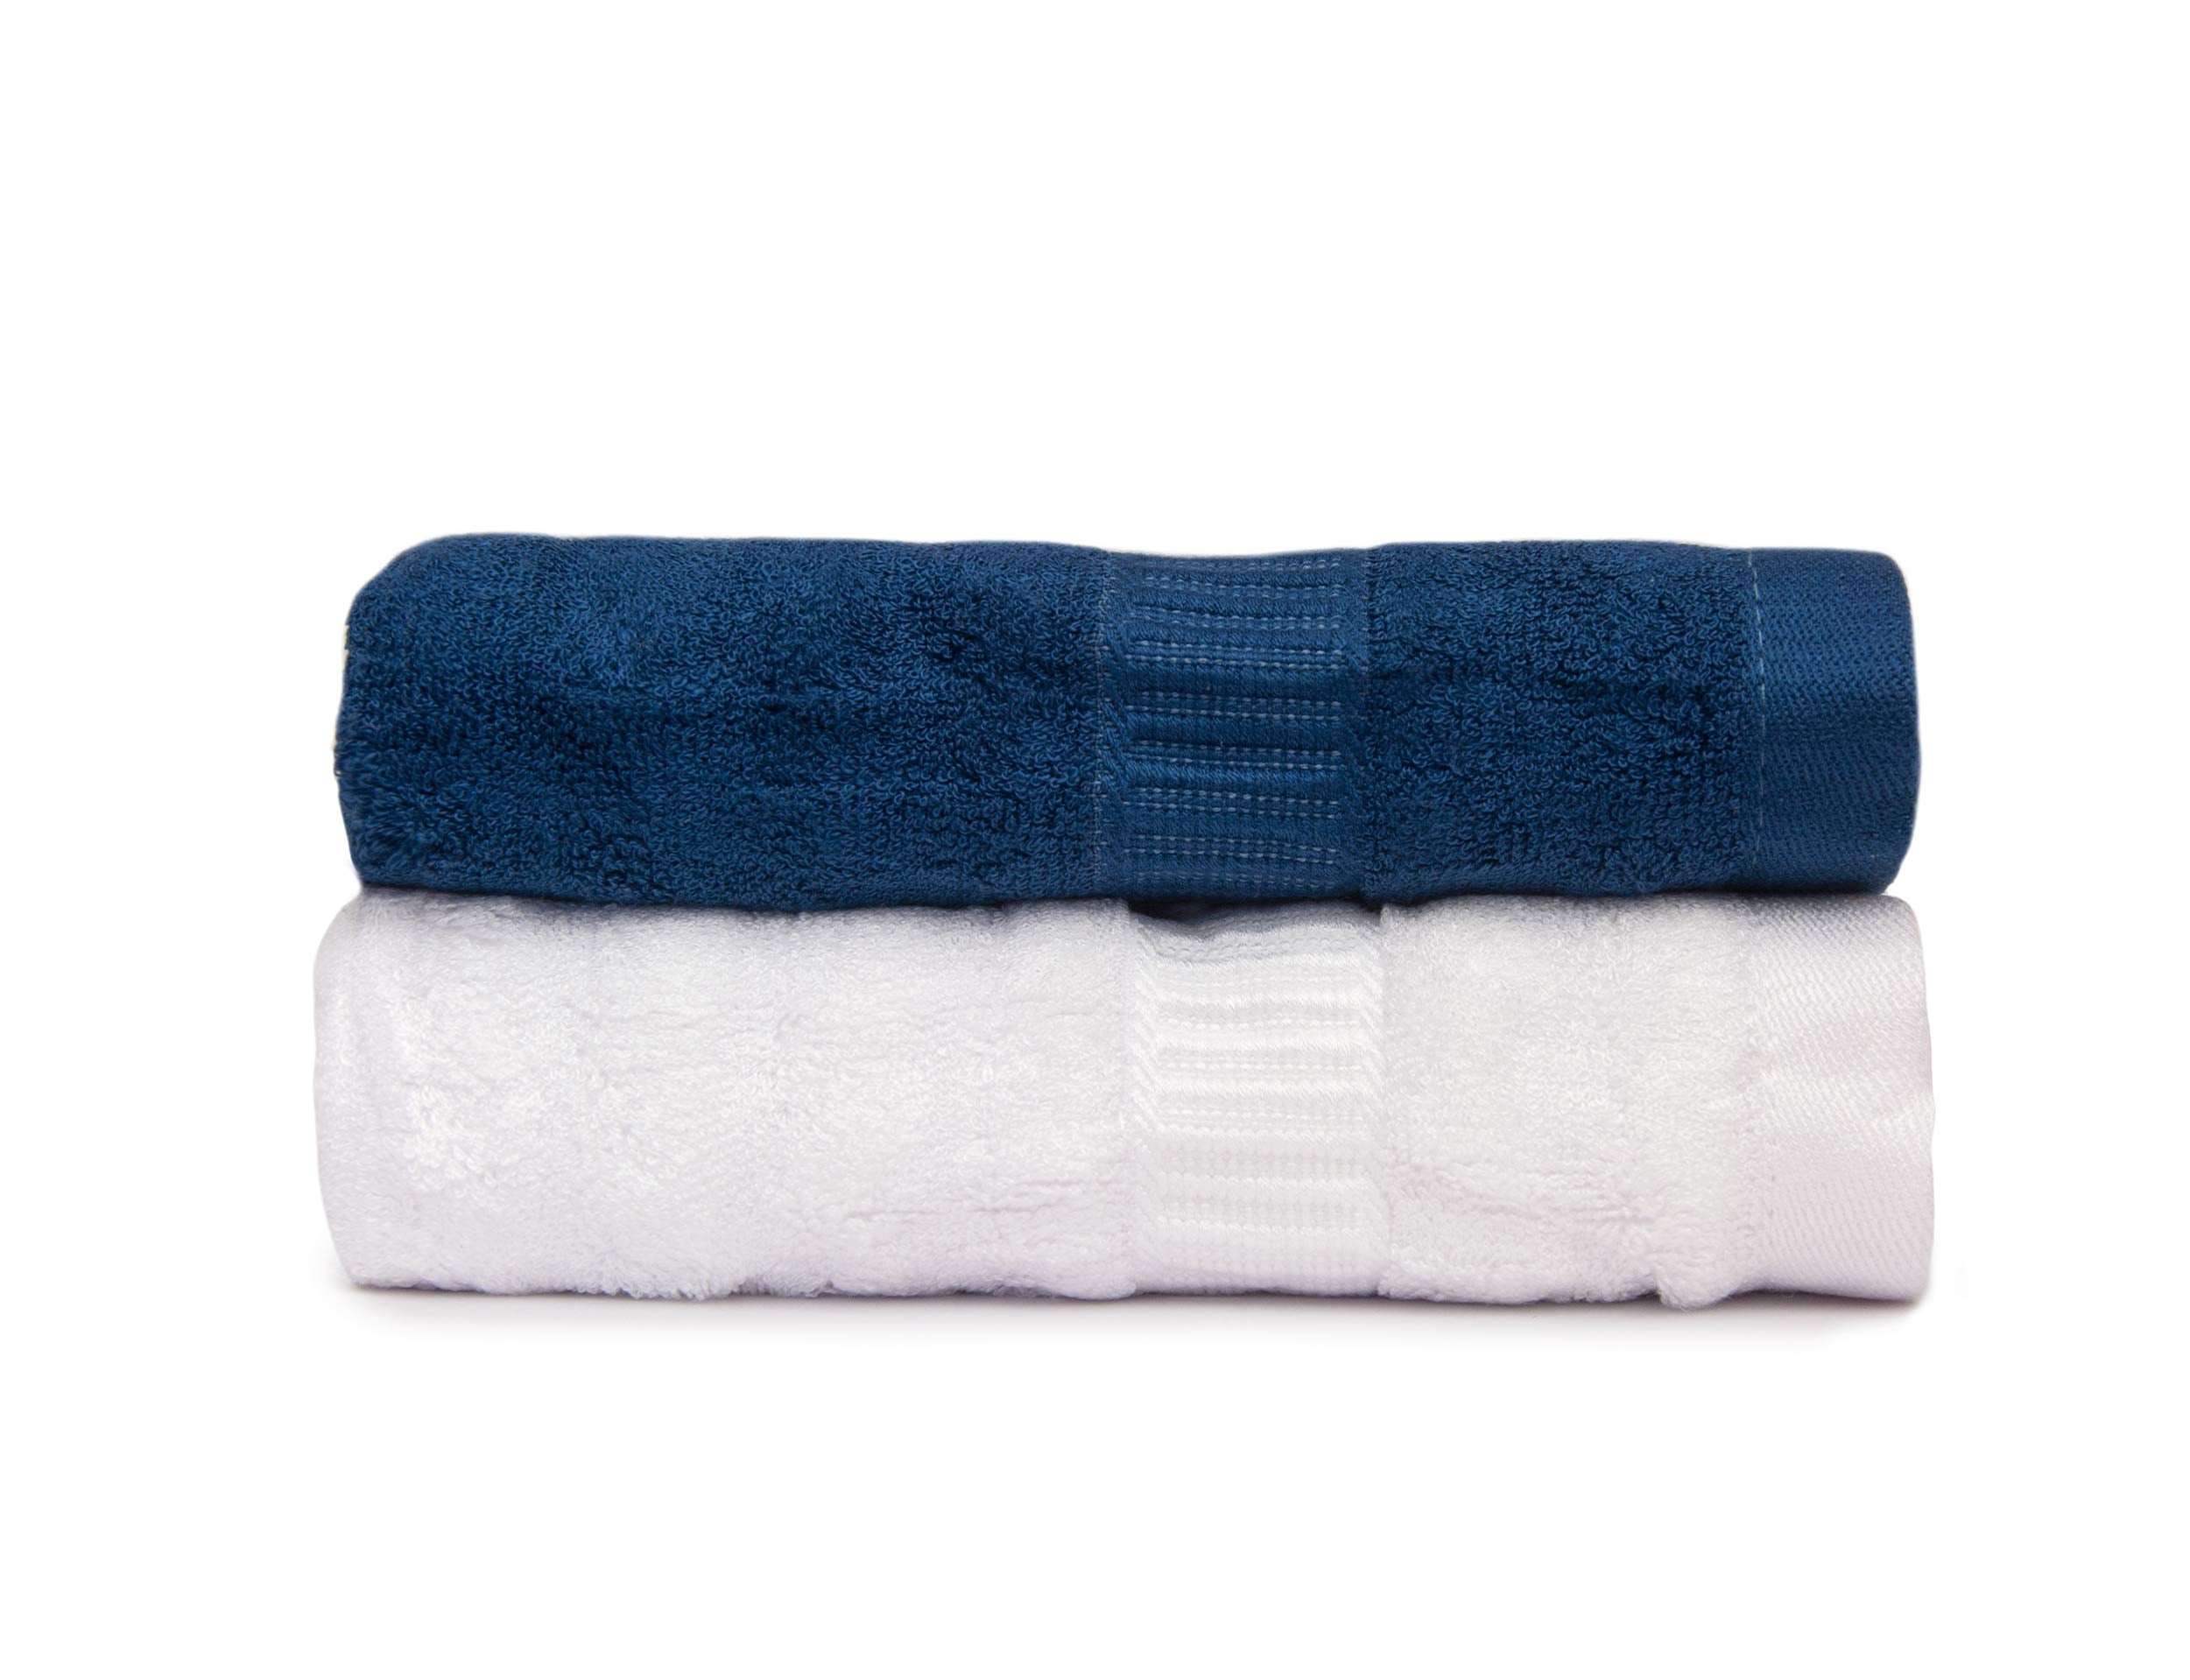 Mush Bamboo Hand Towels Set of 2 | 100% Bamboo | Ultra Soft, Absorbent & Quick Dry Towel for Daily use. Gym, Pool, Travel, Sports and Yoga | 75 X 35 cms | 600 GSM (Navy Blue & White)